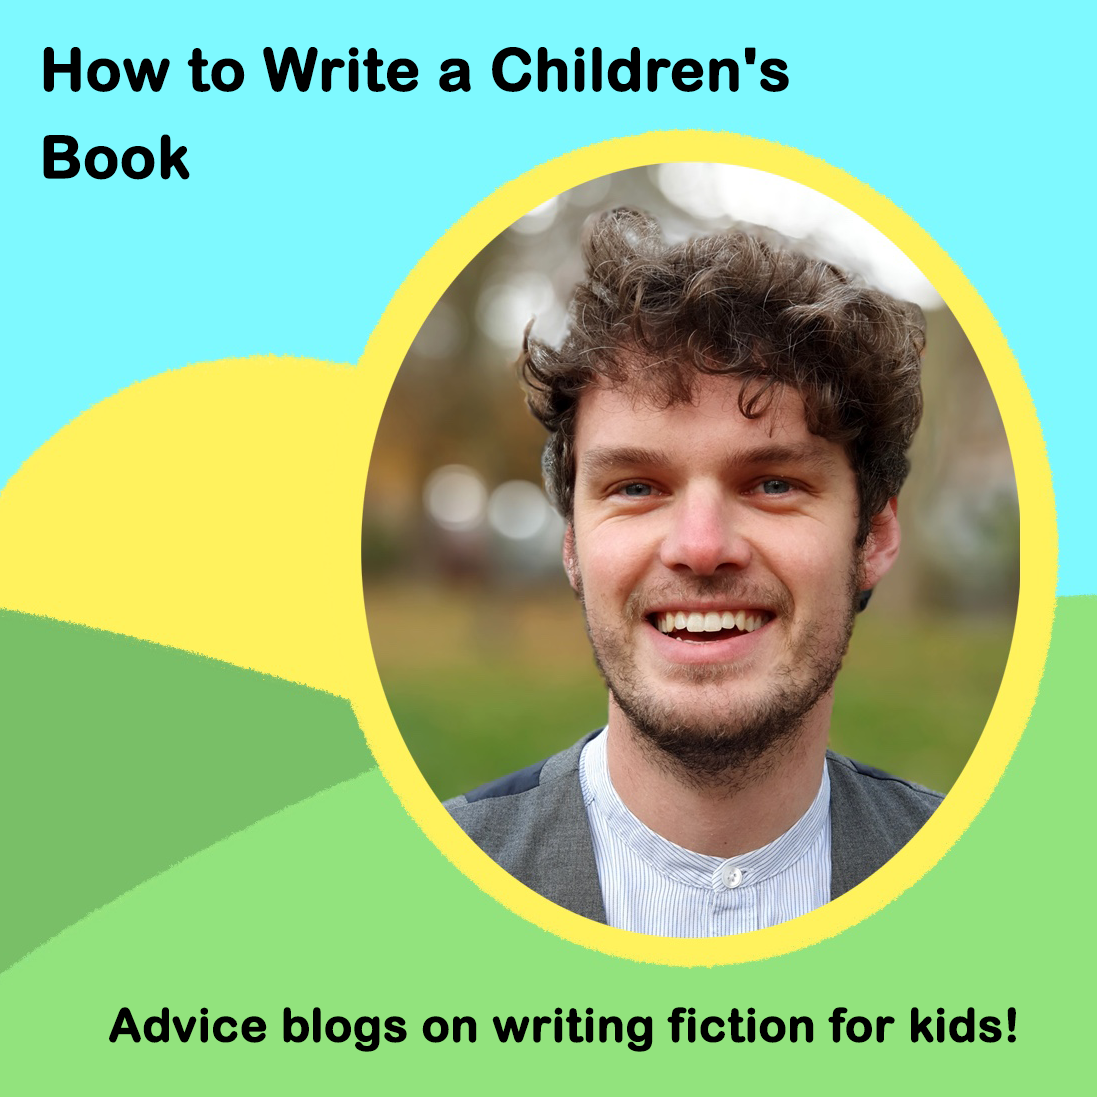 how-to-write-a-children-s-book-how-long-should-my-story-be-by